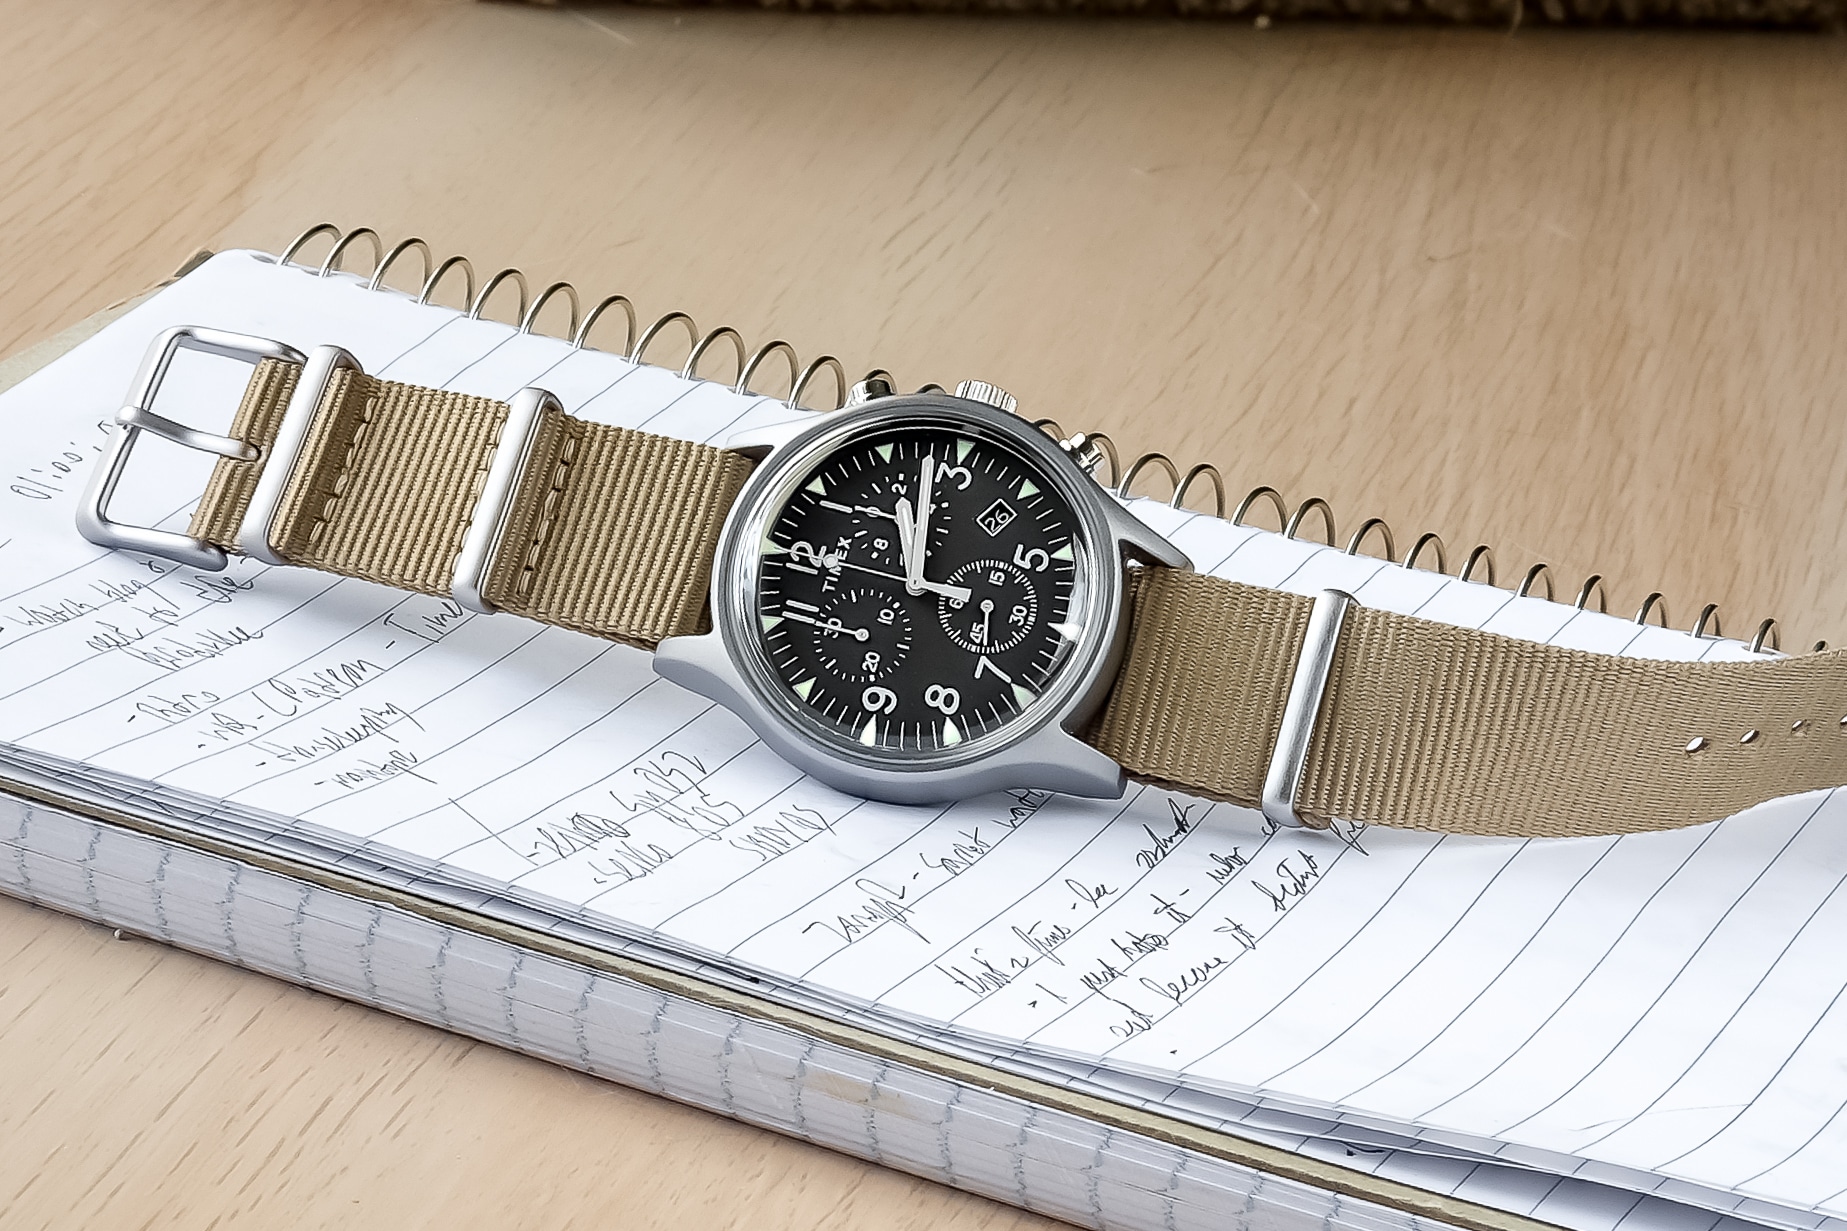 Timex MK1 Chronograph Review: What Are You Really Buying?